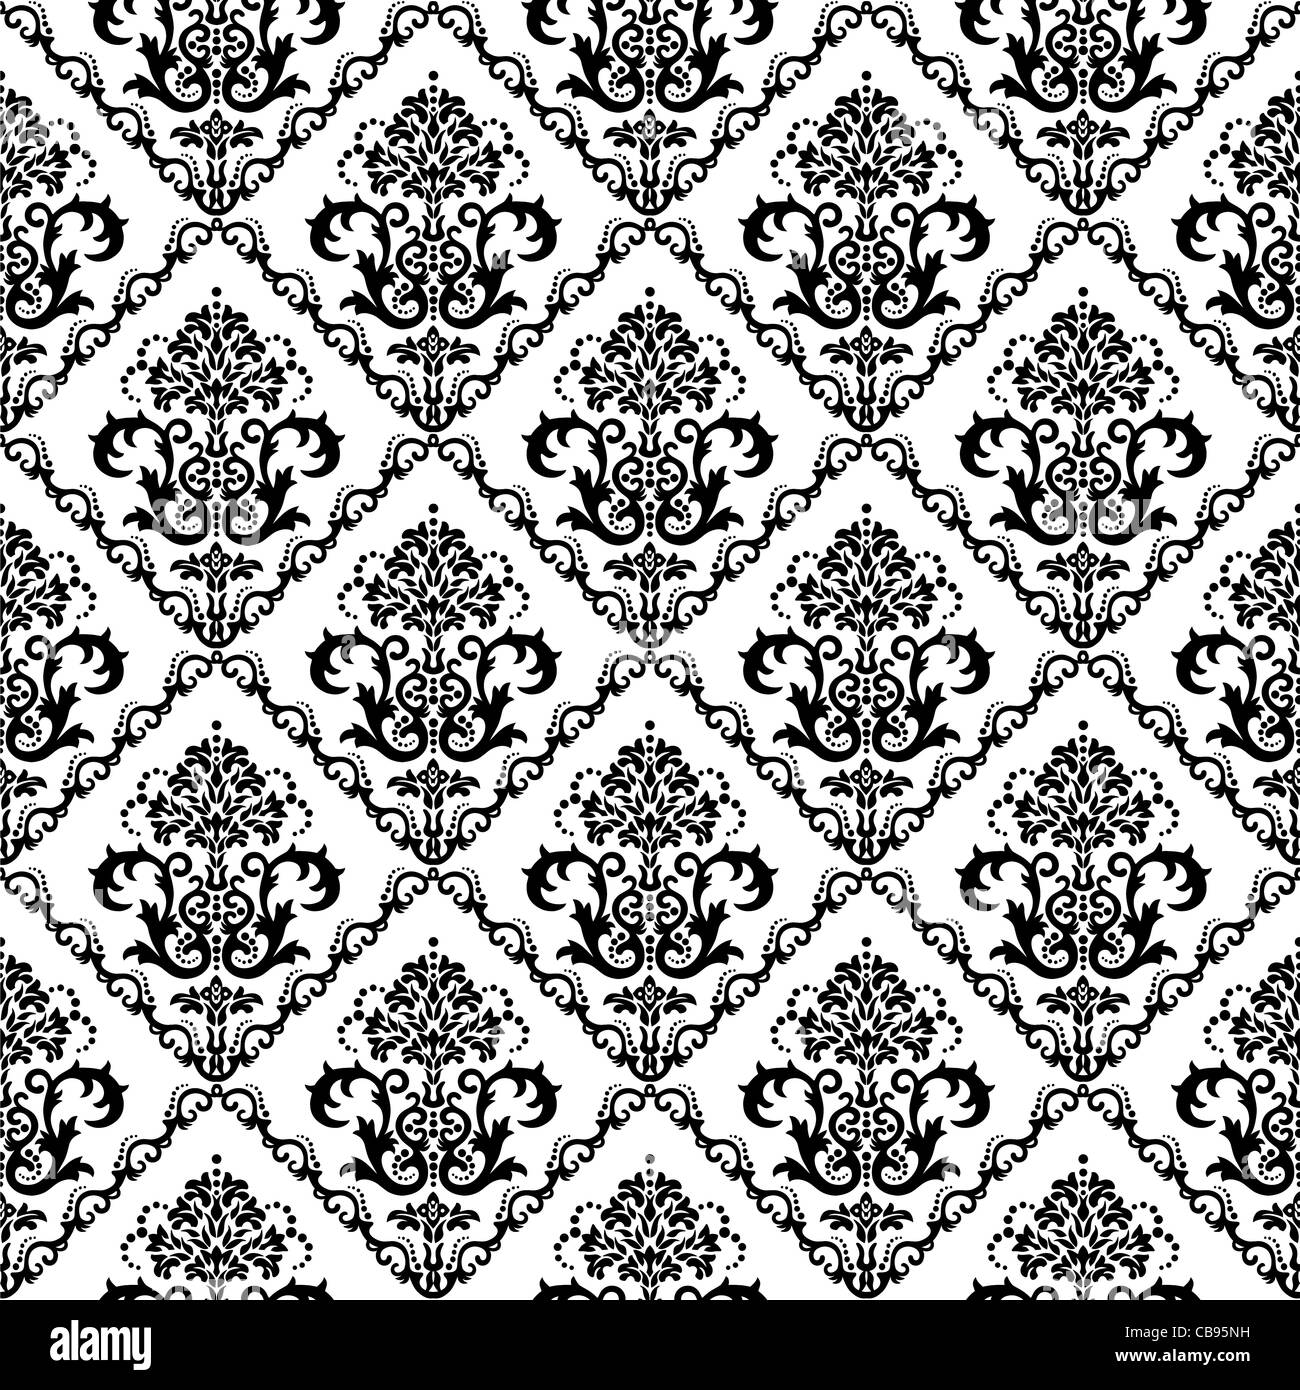 Seamless black and white floral wallpaper in diamond shaped frames Stock Photo